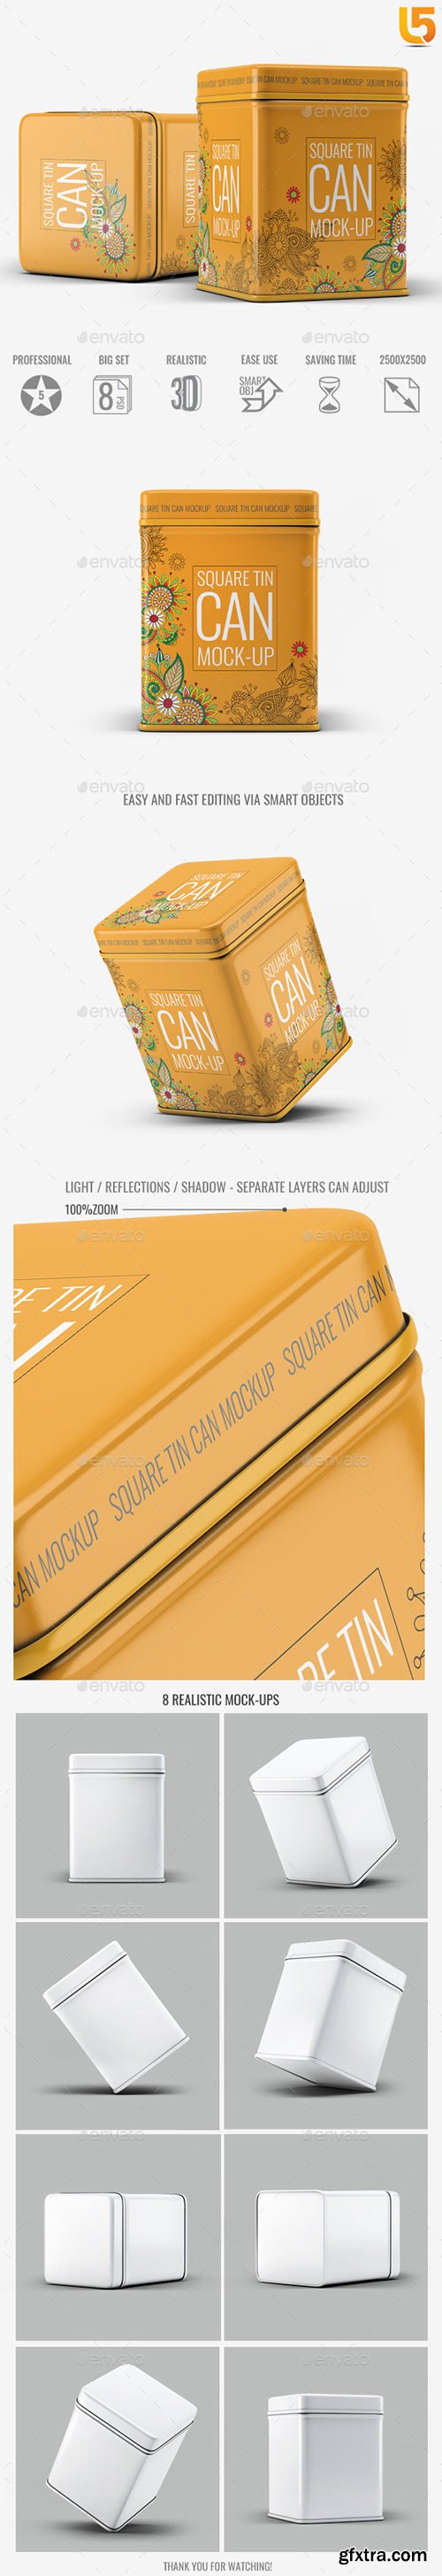 Graphicriver - Square Tin Can Mock-Up 20413173